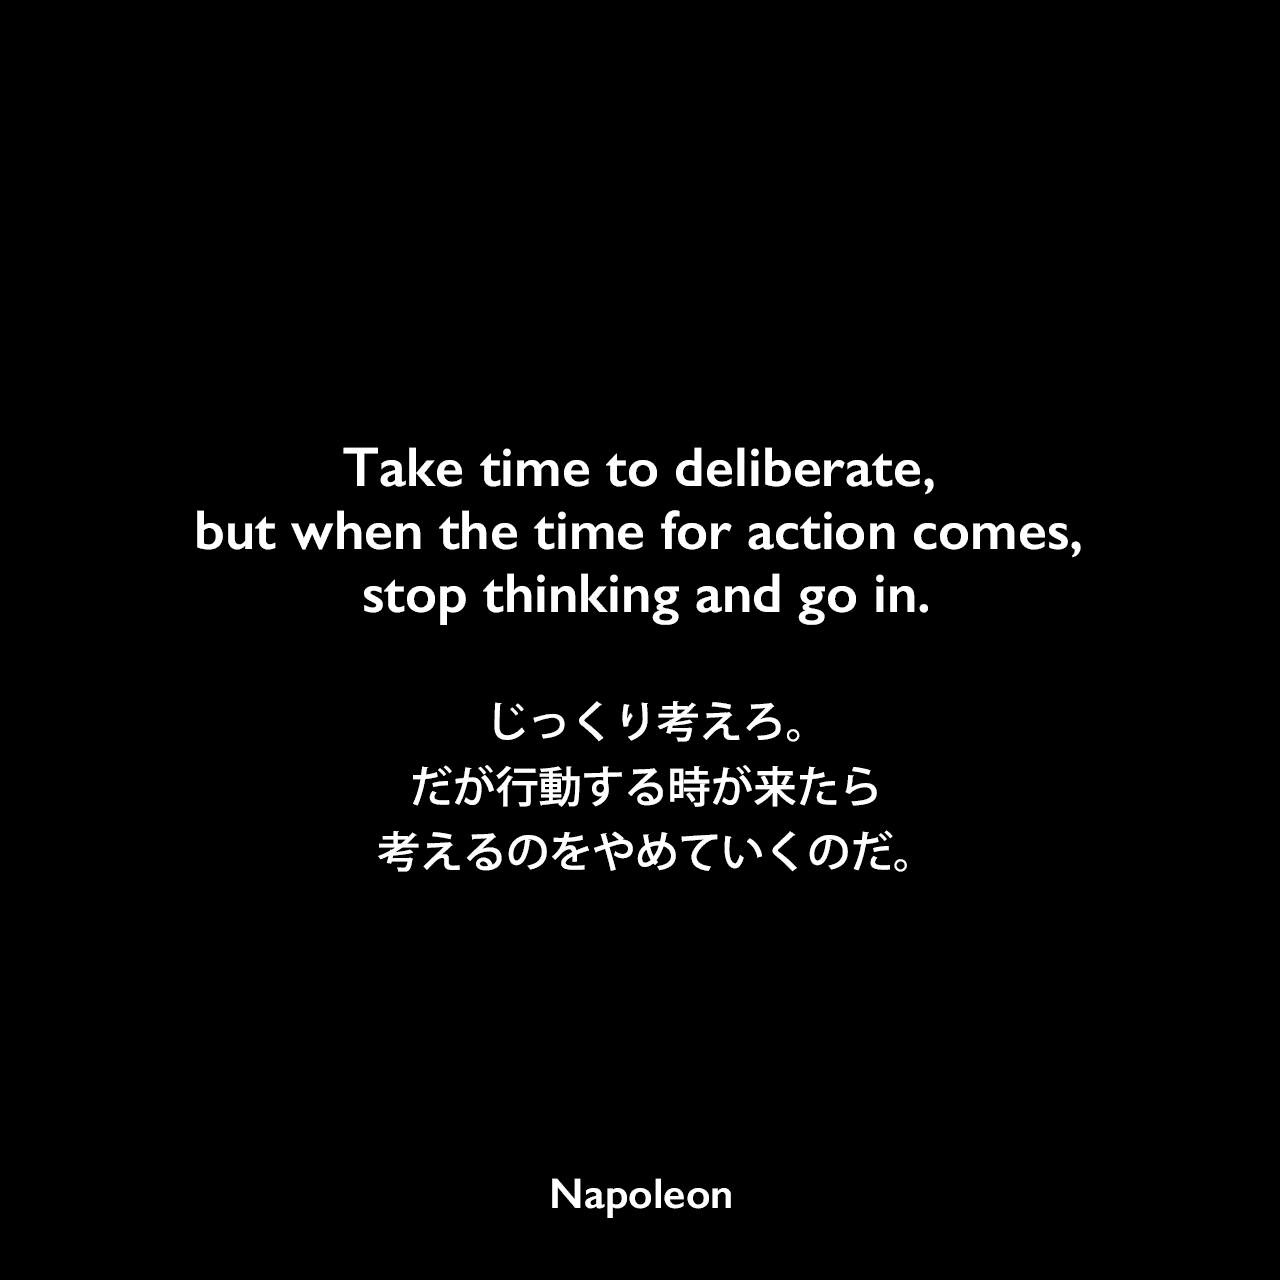 Take time to deliberate, but when the time for action comes, stop thinking and go in.じっくり考えろ。だが行動する時が来たら、考えるのをやめていくのだ。Napoleon